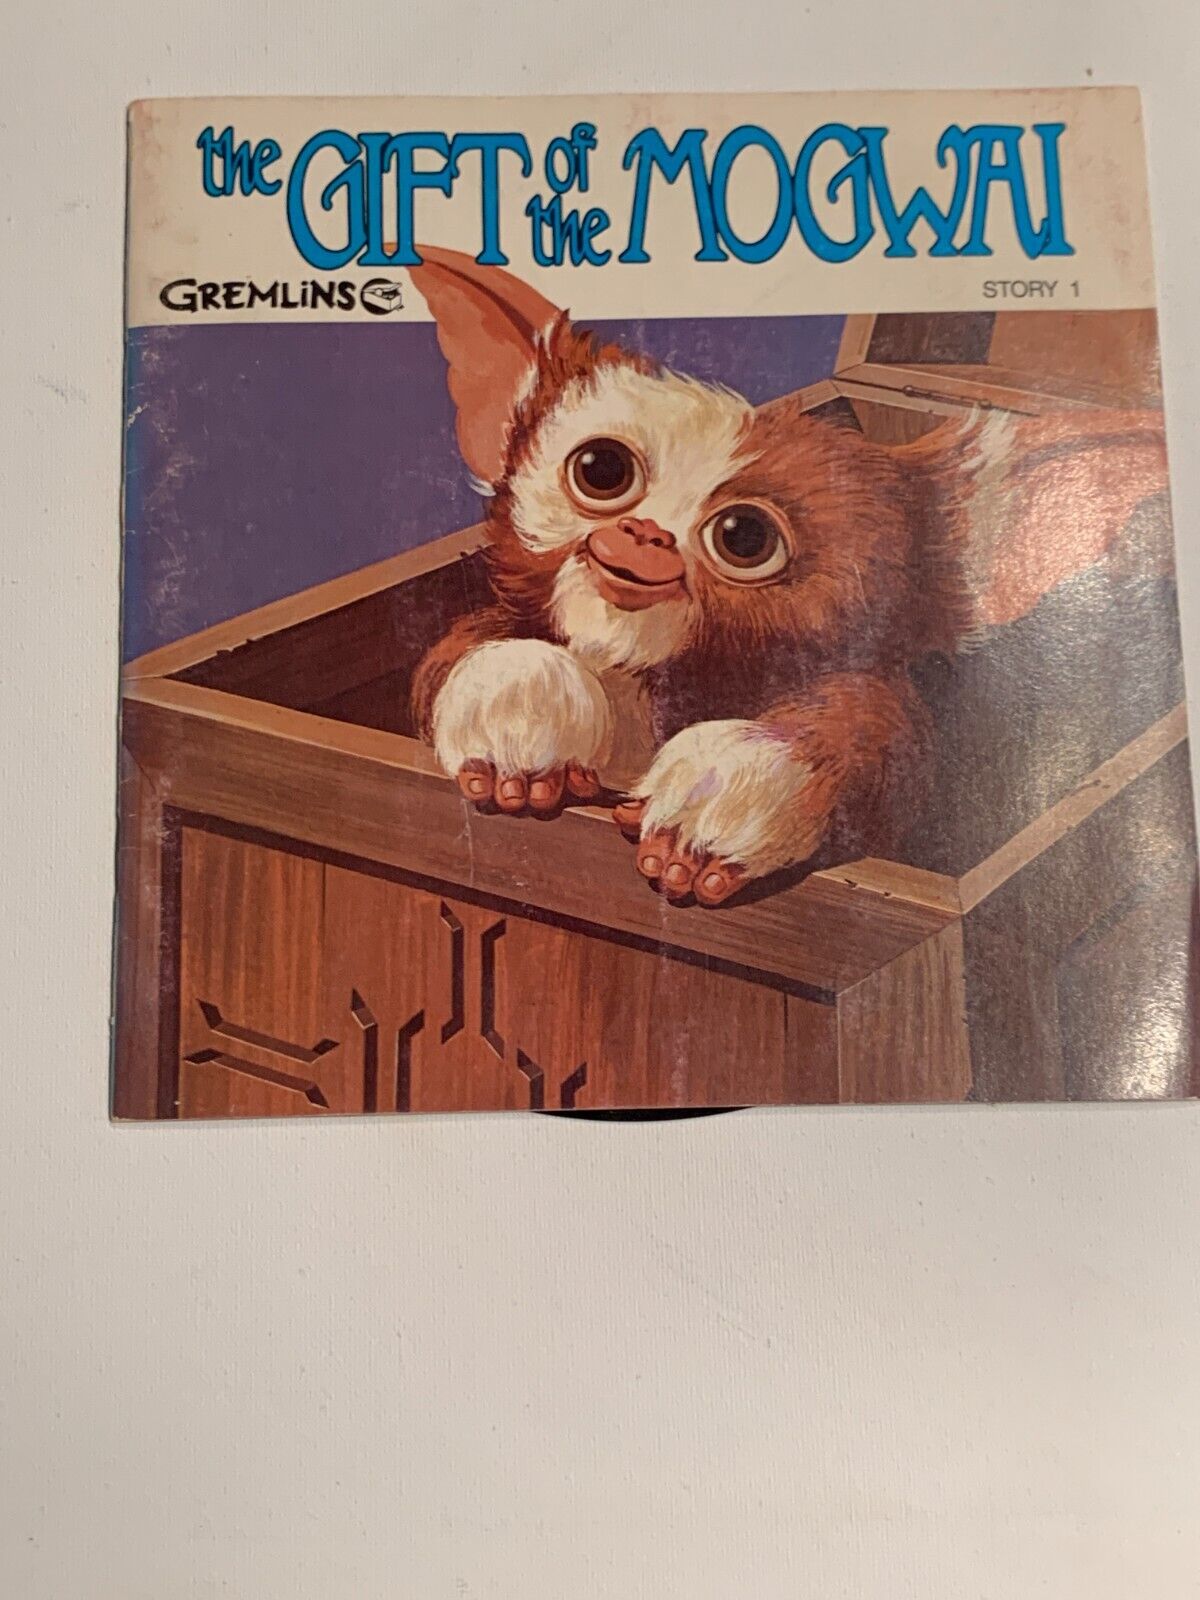 Vintage 1984 Gremlins The Gift Of The Mogwai Story 16 Page Book 45 Record Gizmo